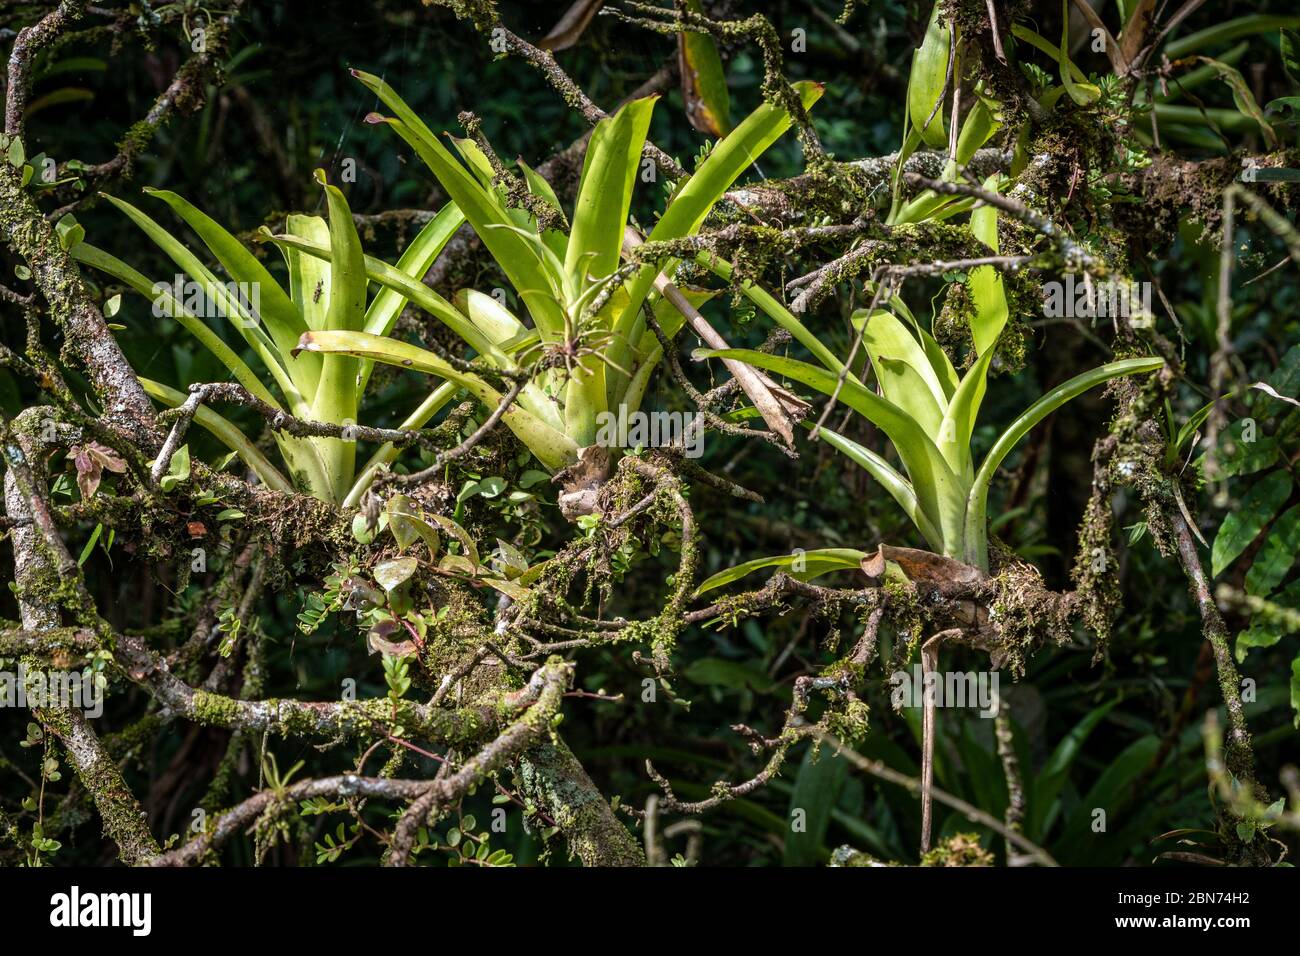 Bromeliads on Tree, Costa Rica Banque D'Images